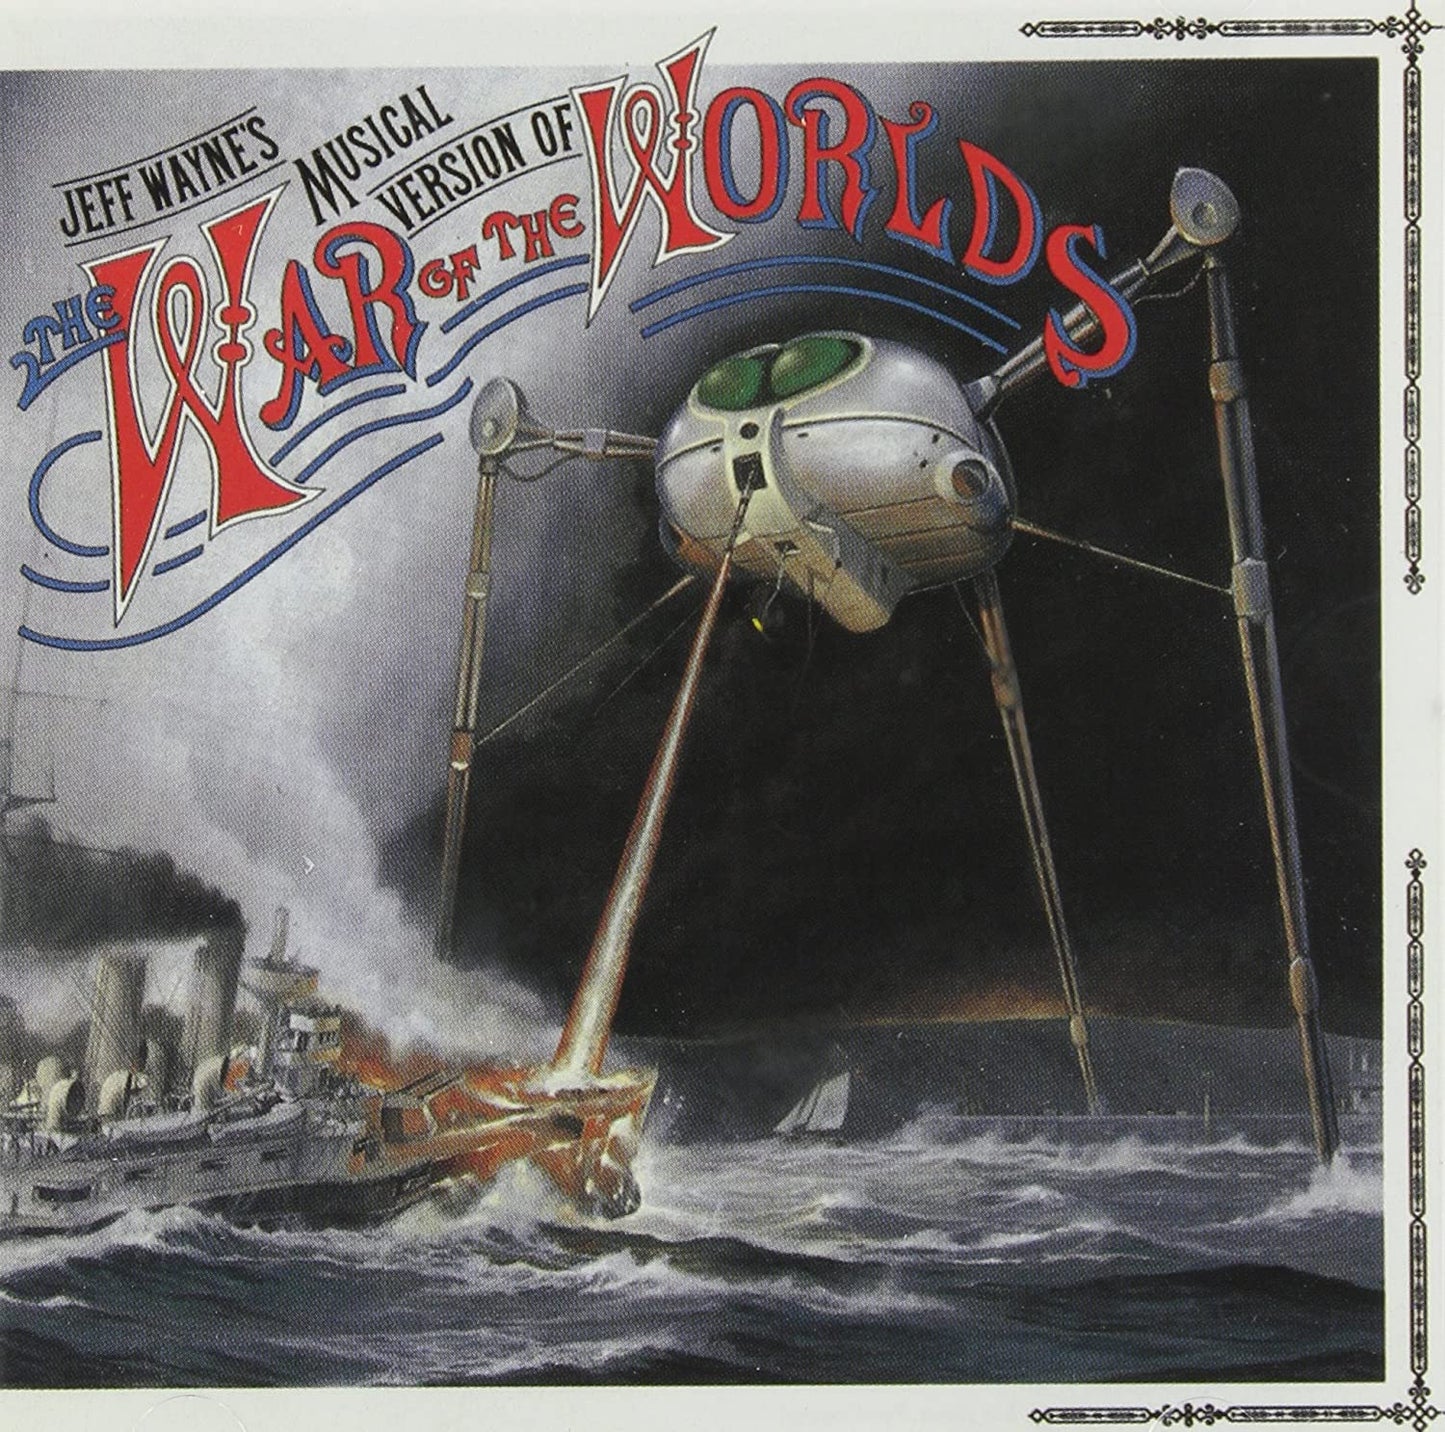 The War Of The Worlds Compilation  [Audio CD] Various (Used - Like New)